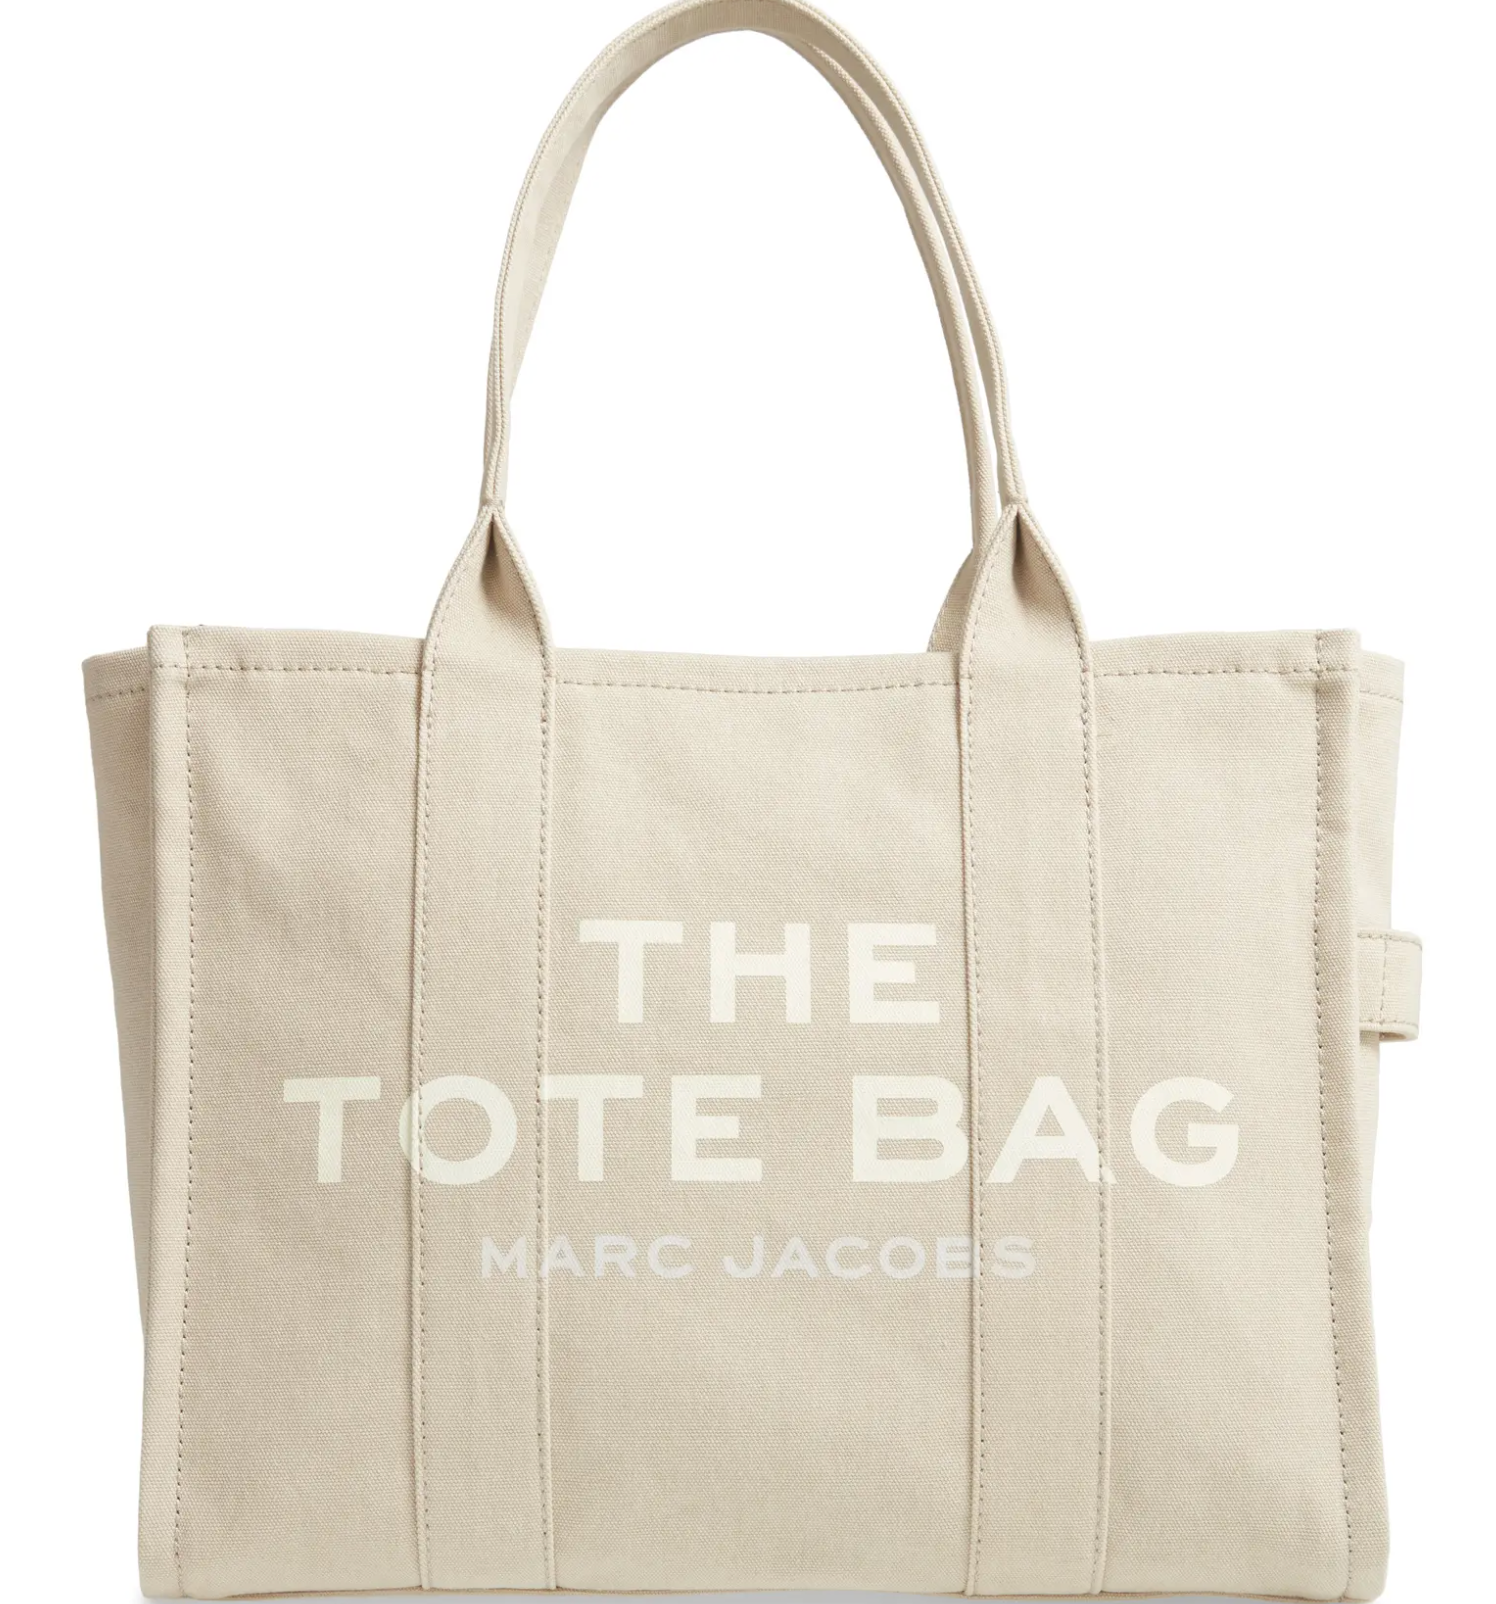 Best Marc Jacobs Tote Bag Alternatives and Look Alikes